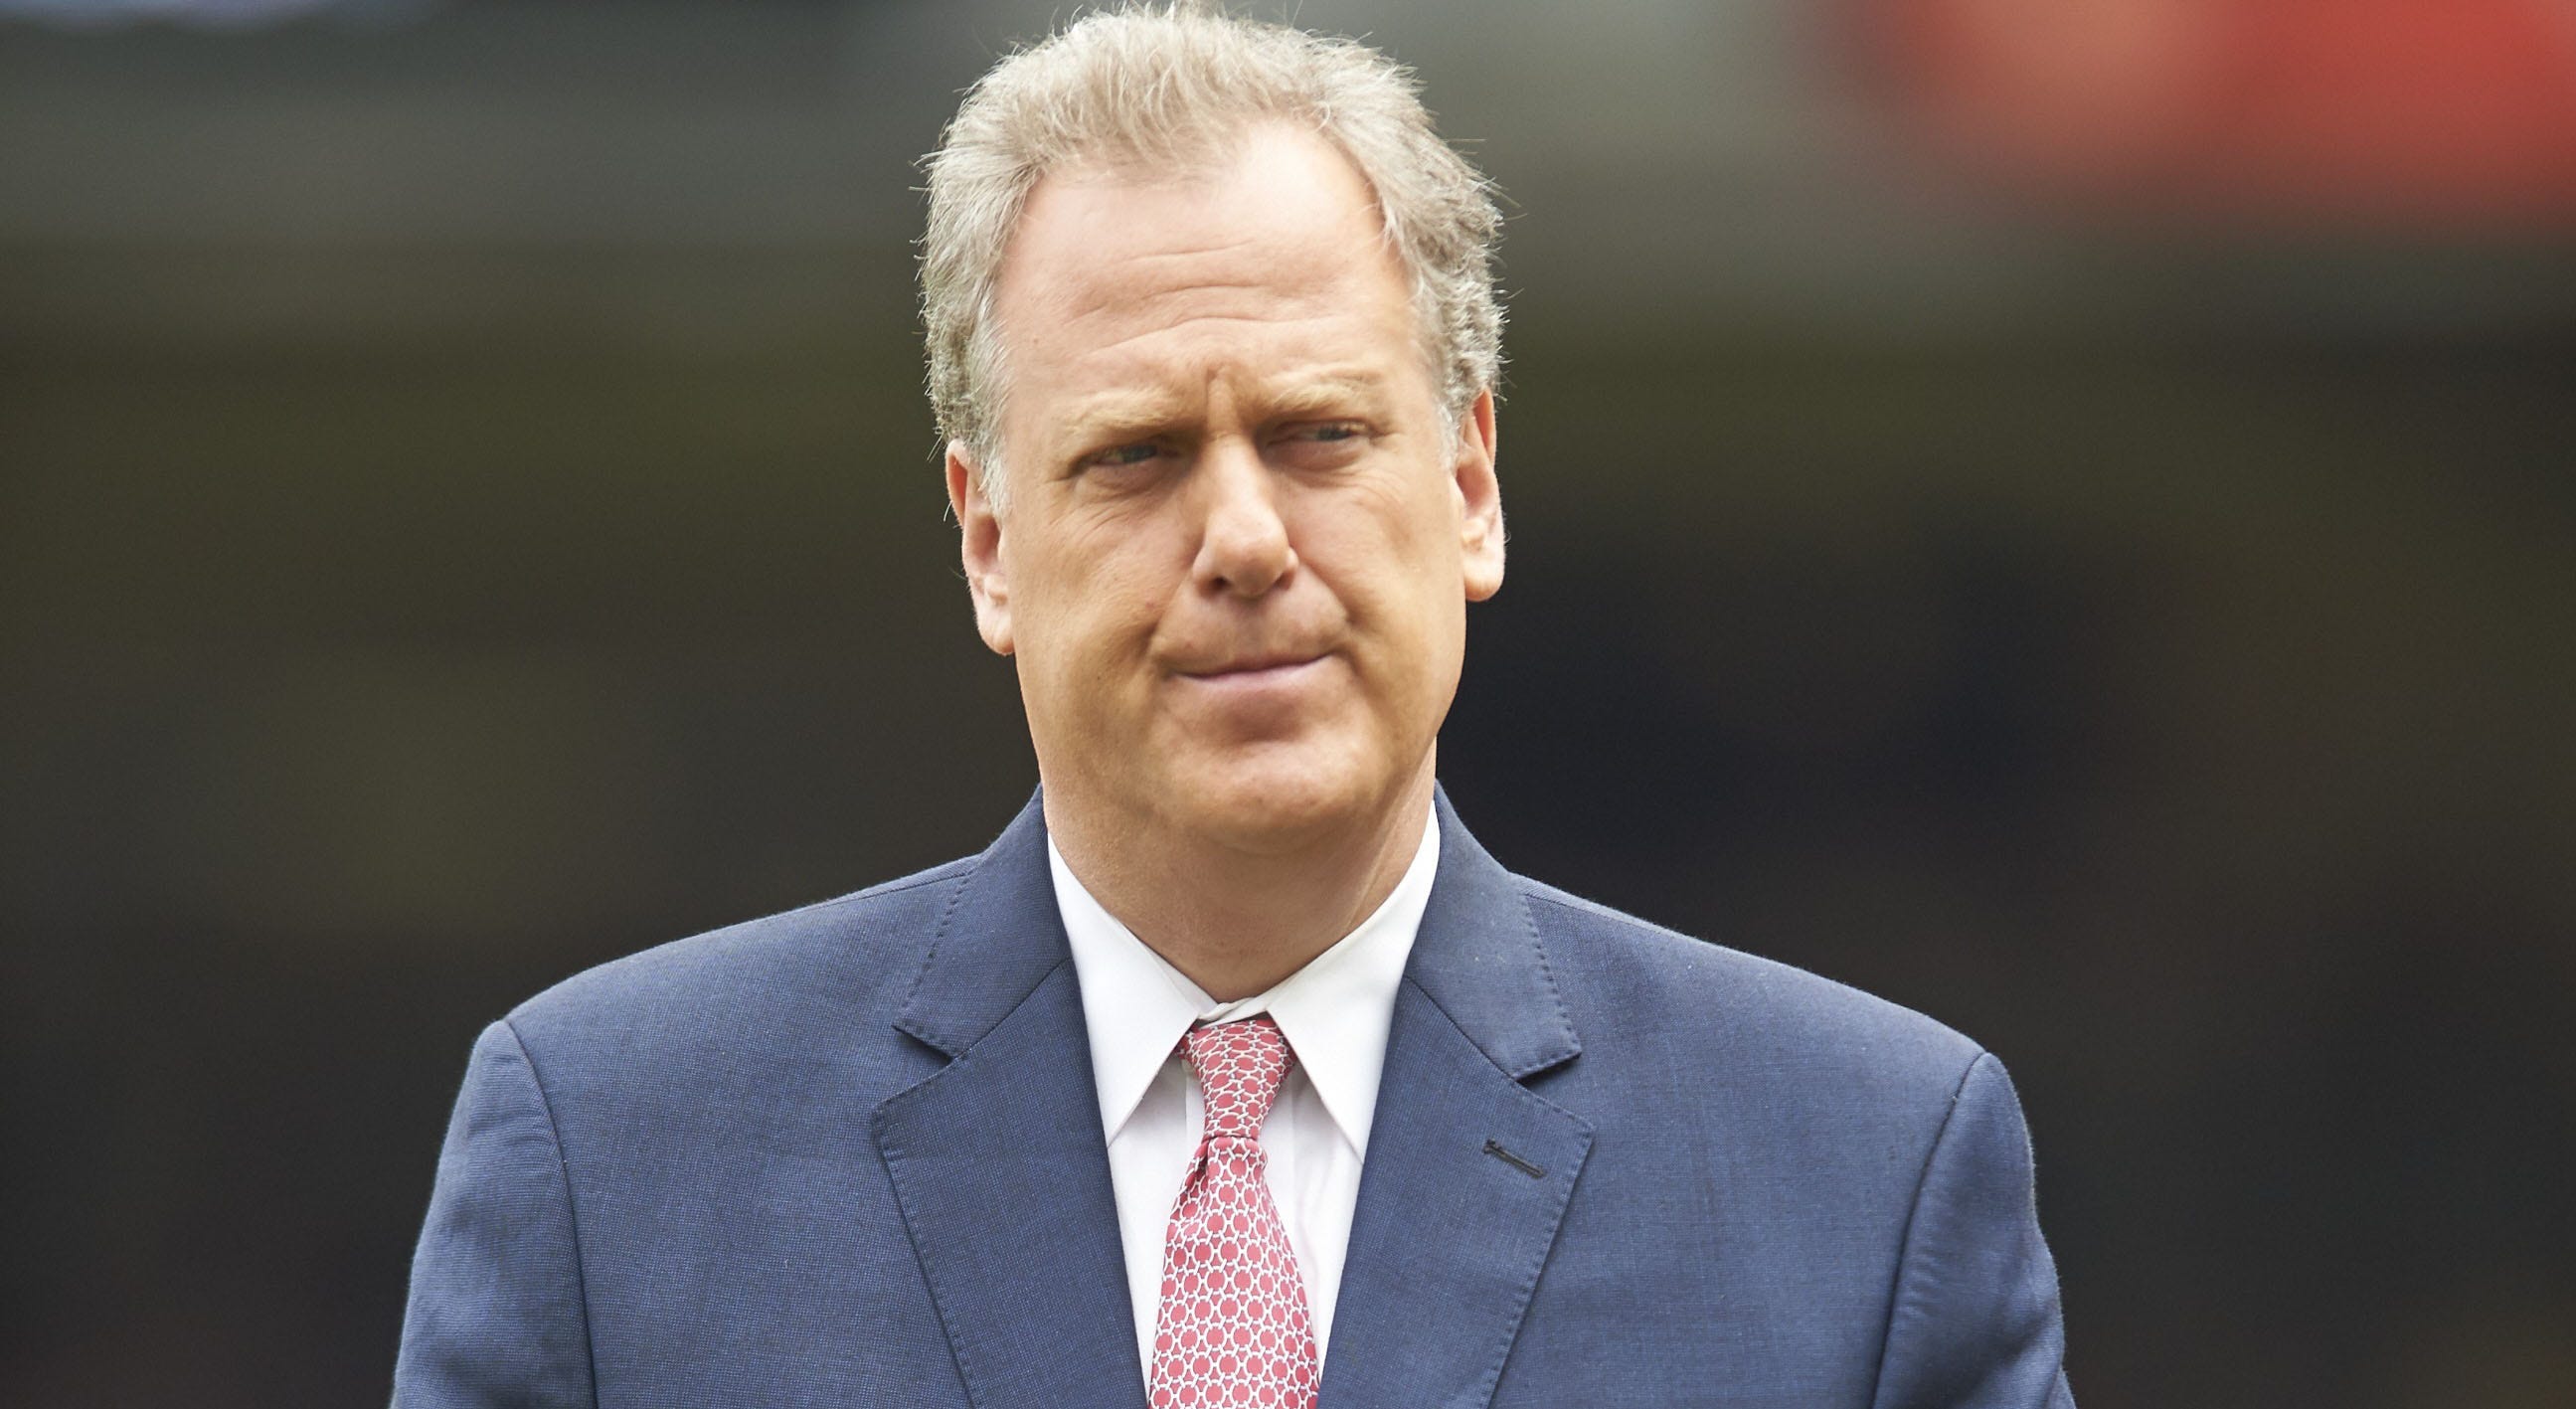 Curt Schilling sounds off on Michael Kay's call of Aaron Judge's 61st home run: 'Let the moment breathe'